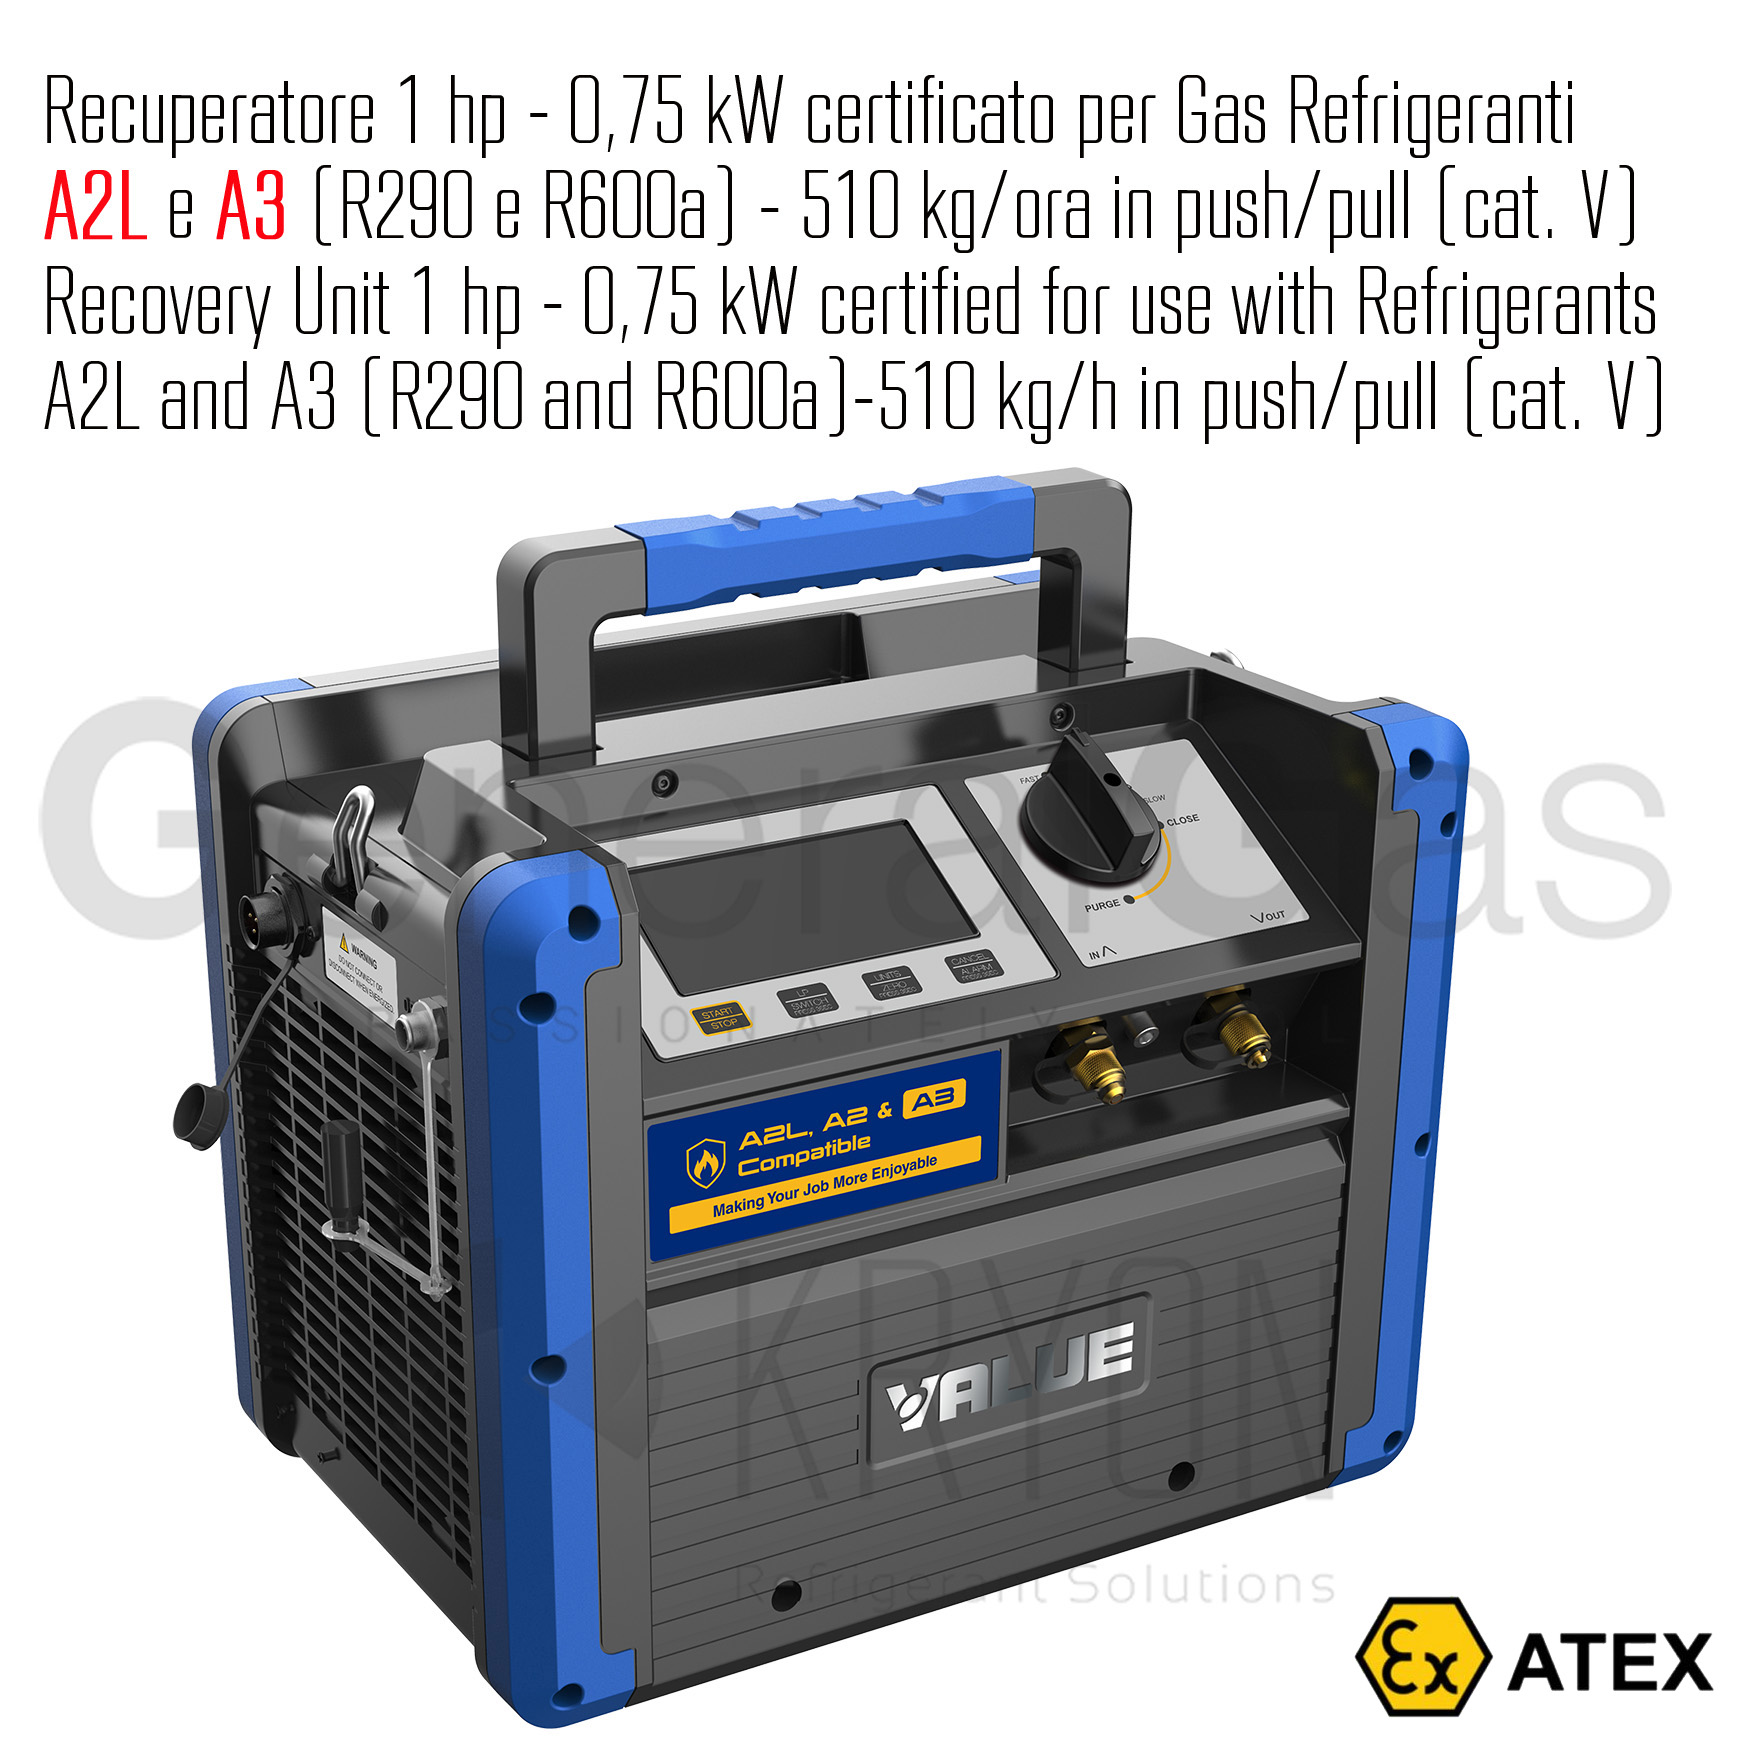 VALUE VRDDF - Recovery unit for flammable refrigerants 1 HP-0,75 KW, 510 kg/hour in push/pull, suitable for  A2L and A3 refrigerants (propane R290) - ATEX certified